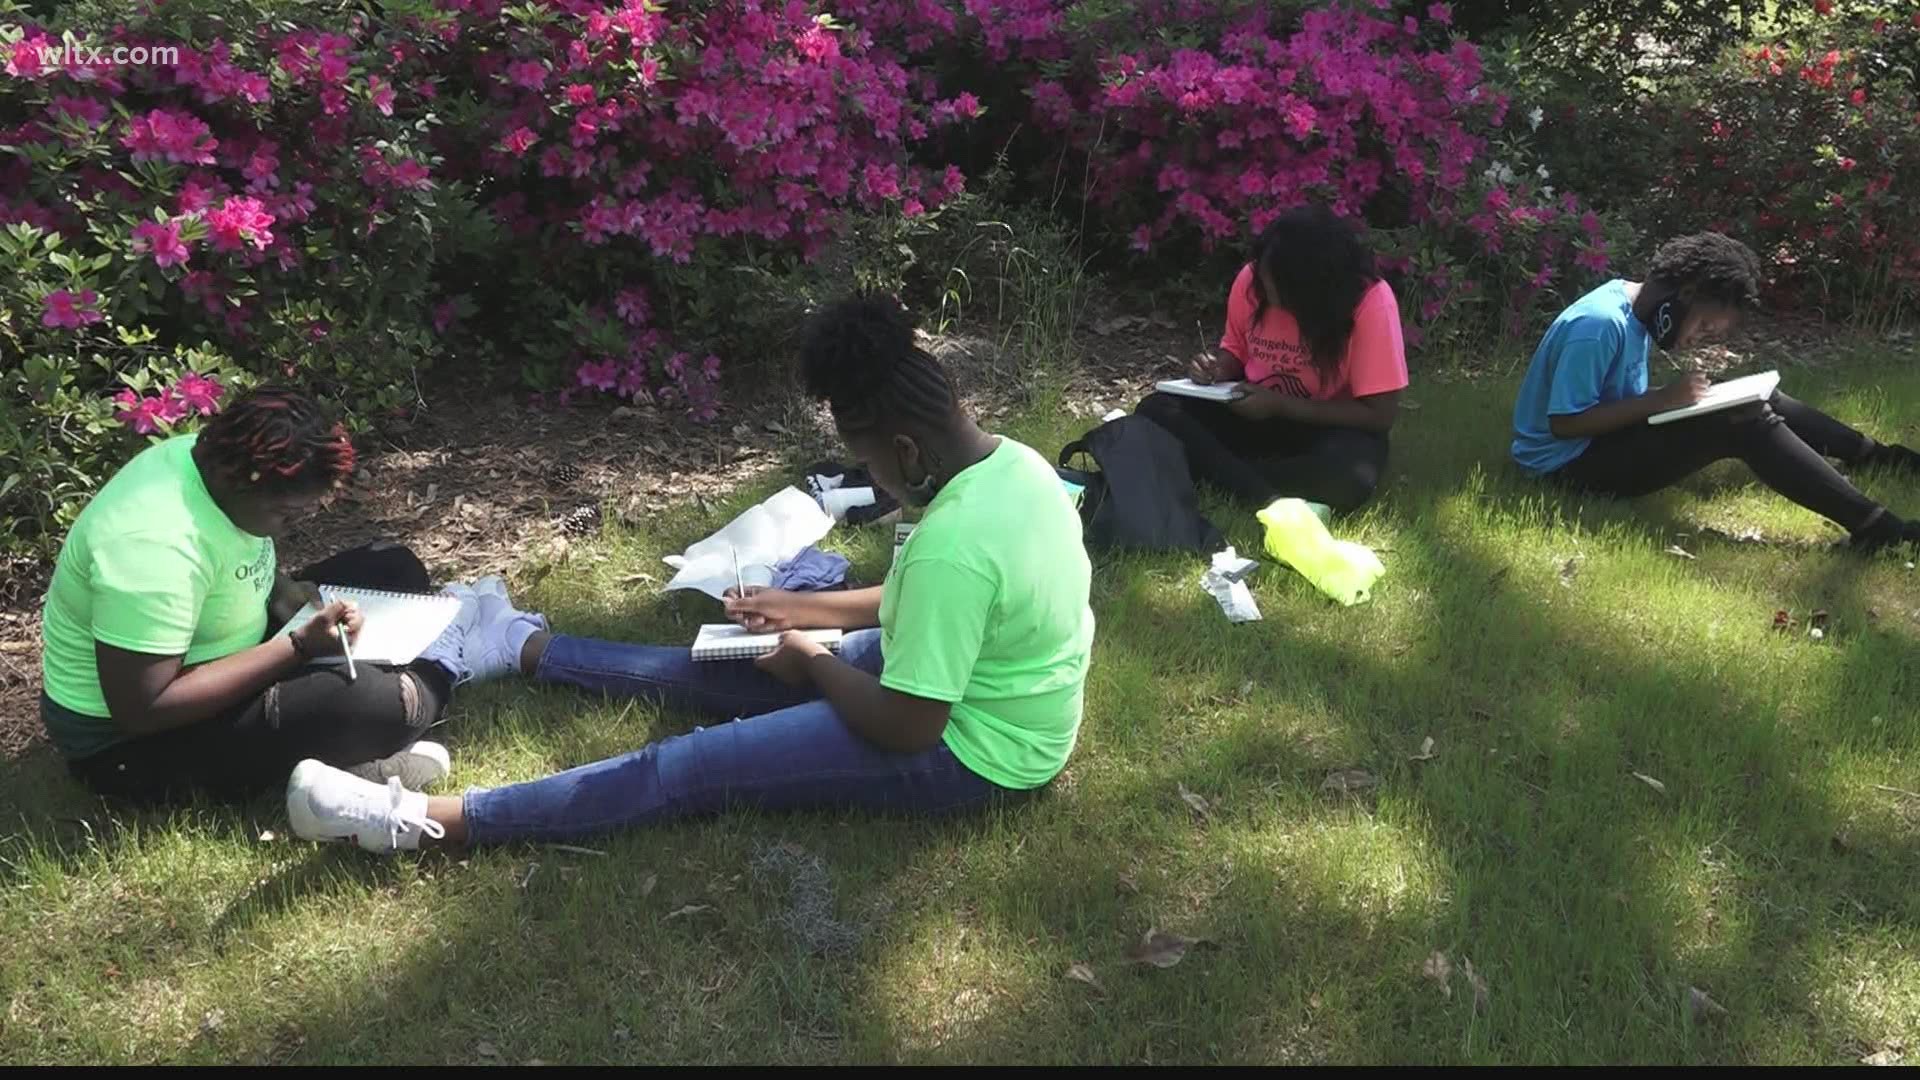 A group of kids from the Orangeburg Girls and Boys club spent the day at Edisto Gardens drawing flowers and enjoying nature.